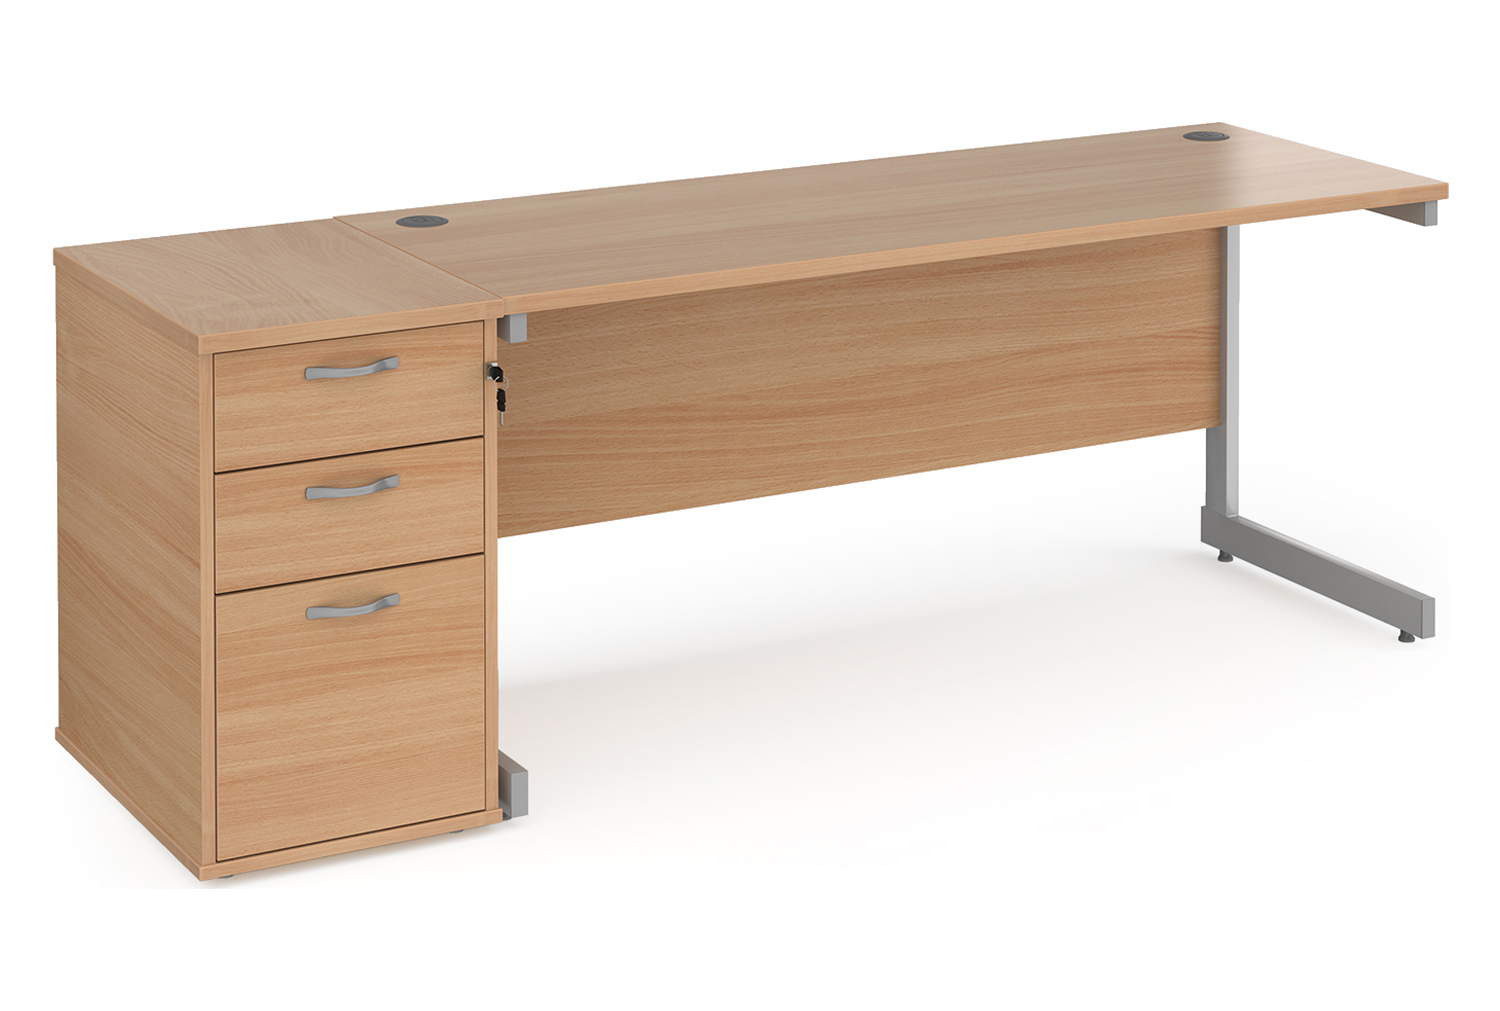 Tully I Office Desk Bundle Deal 4, 160wx60dx73h (cm), Beech, Fully Installed